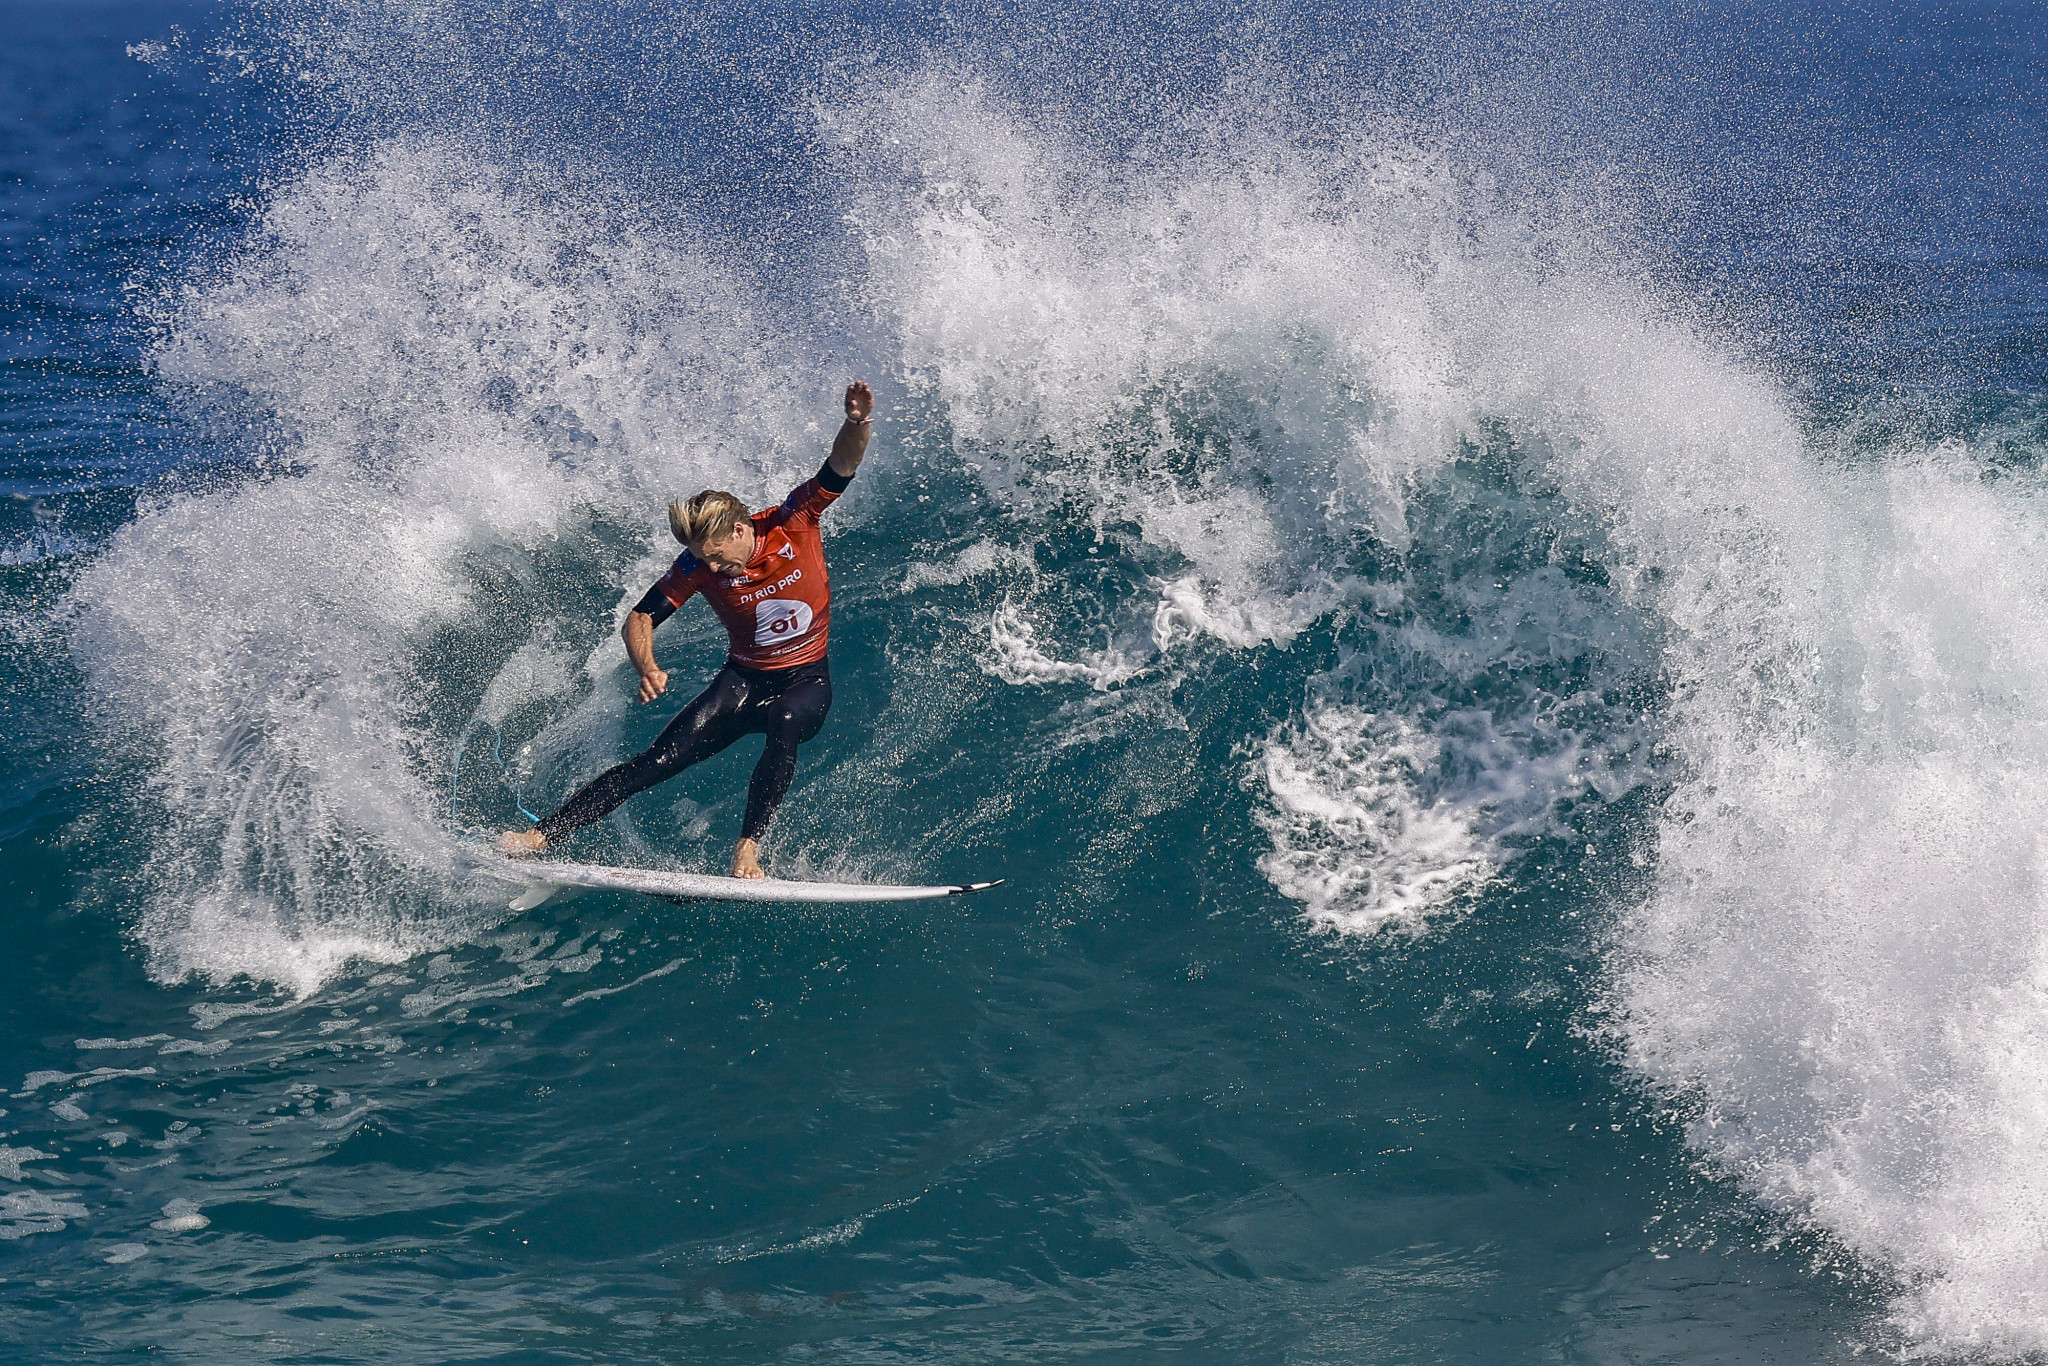 Ethan Ewing is a first-time winner on the WSL Championship Tour ©Getty Images